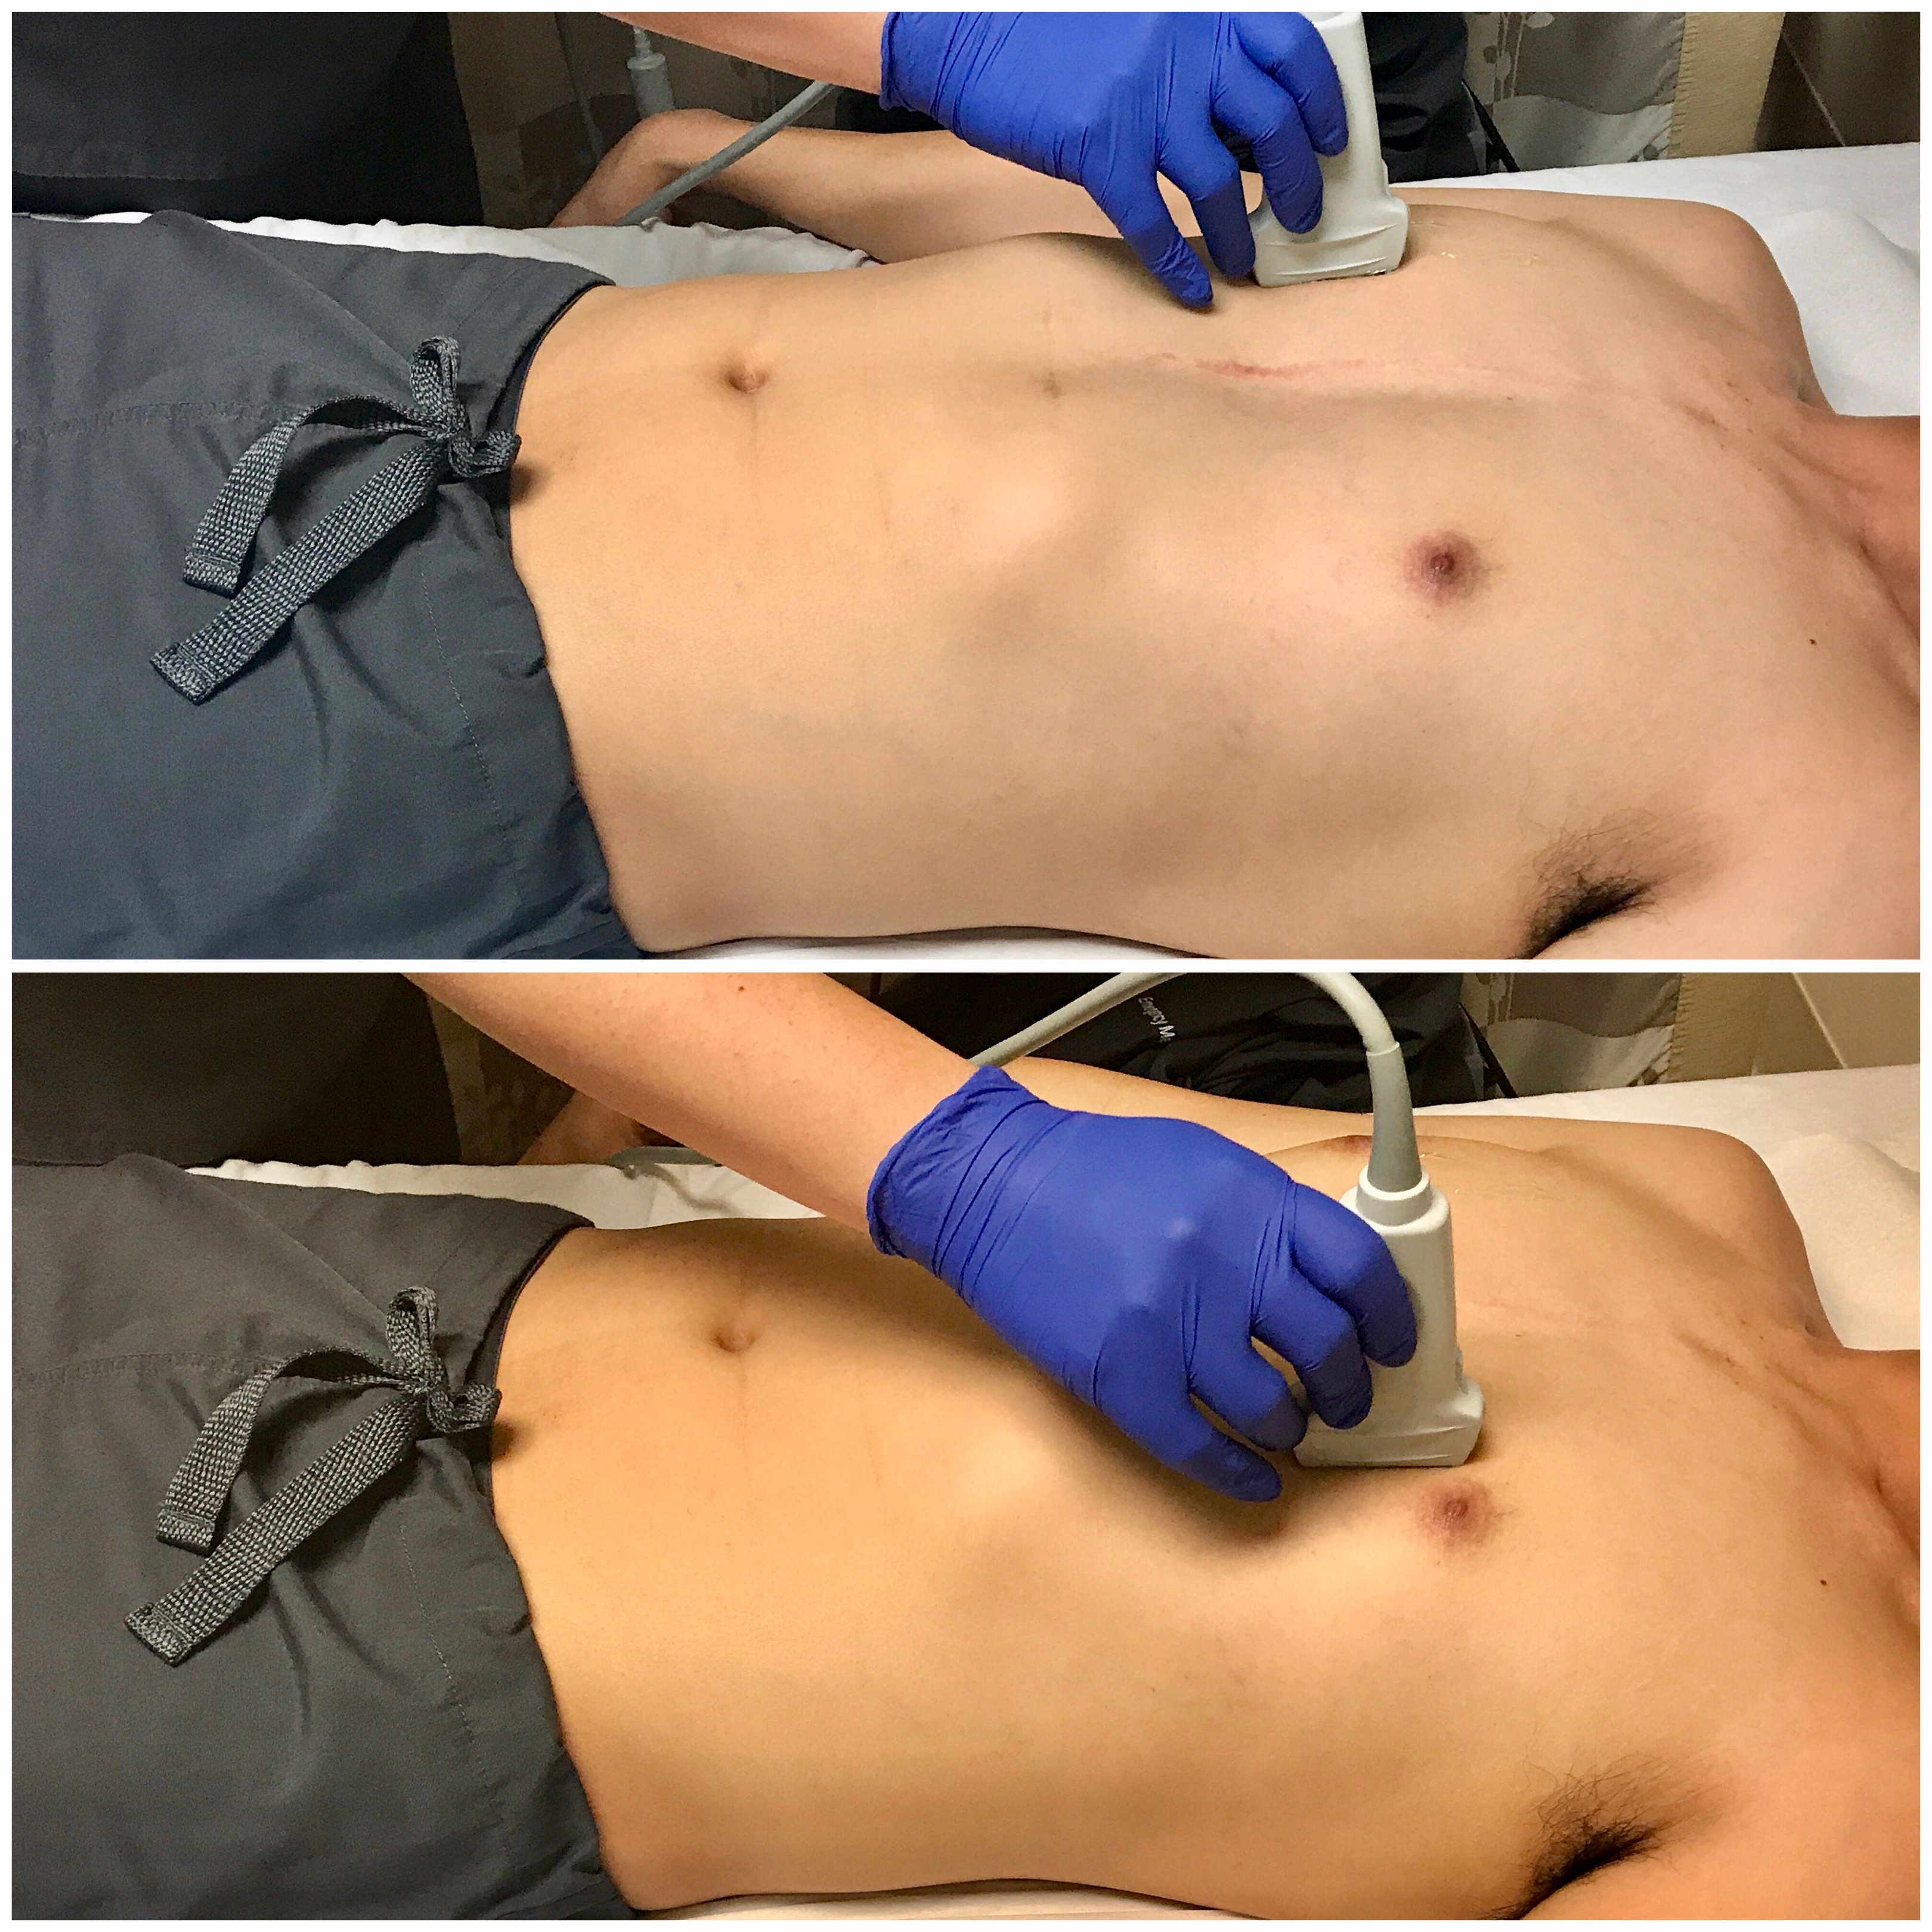 Image 11 - Transducer placement and orientation for evaluating for pneumothorax in the supine patient.jpg